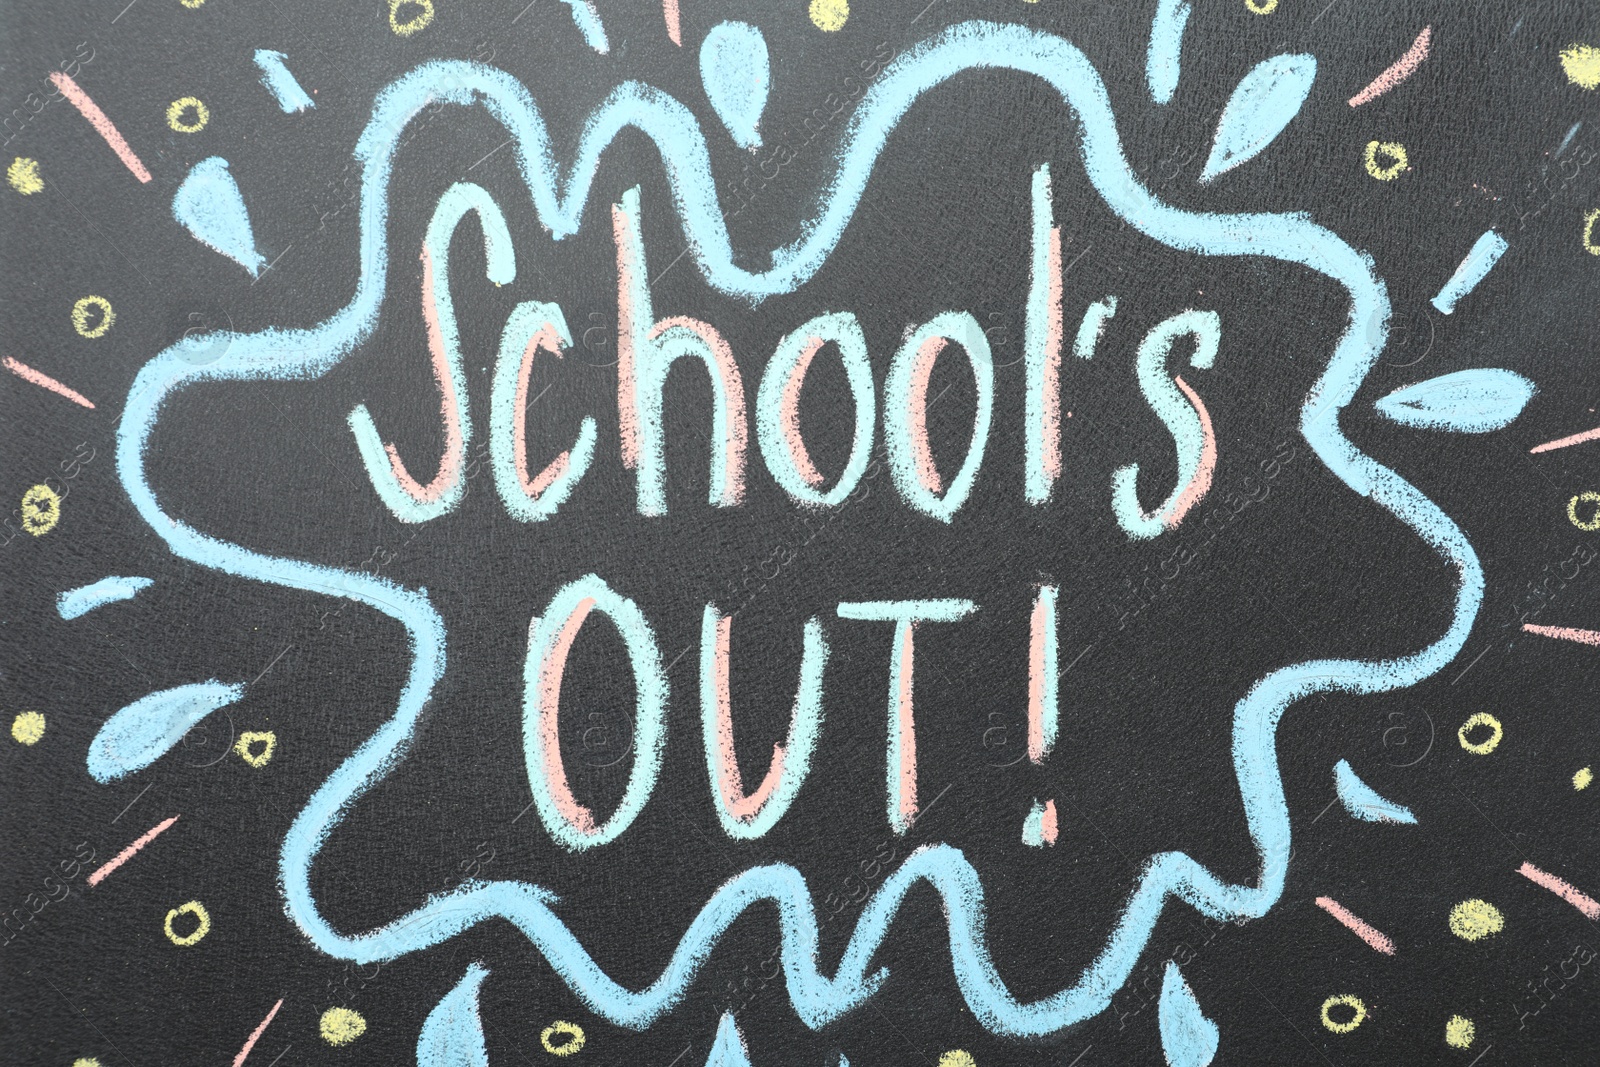 Photo of Text School's Out written on black chalkboard. Summer holidays